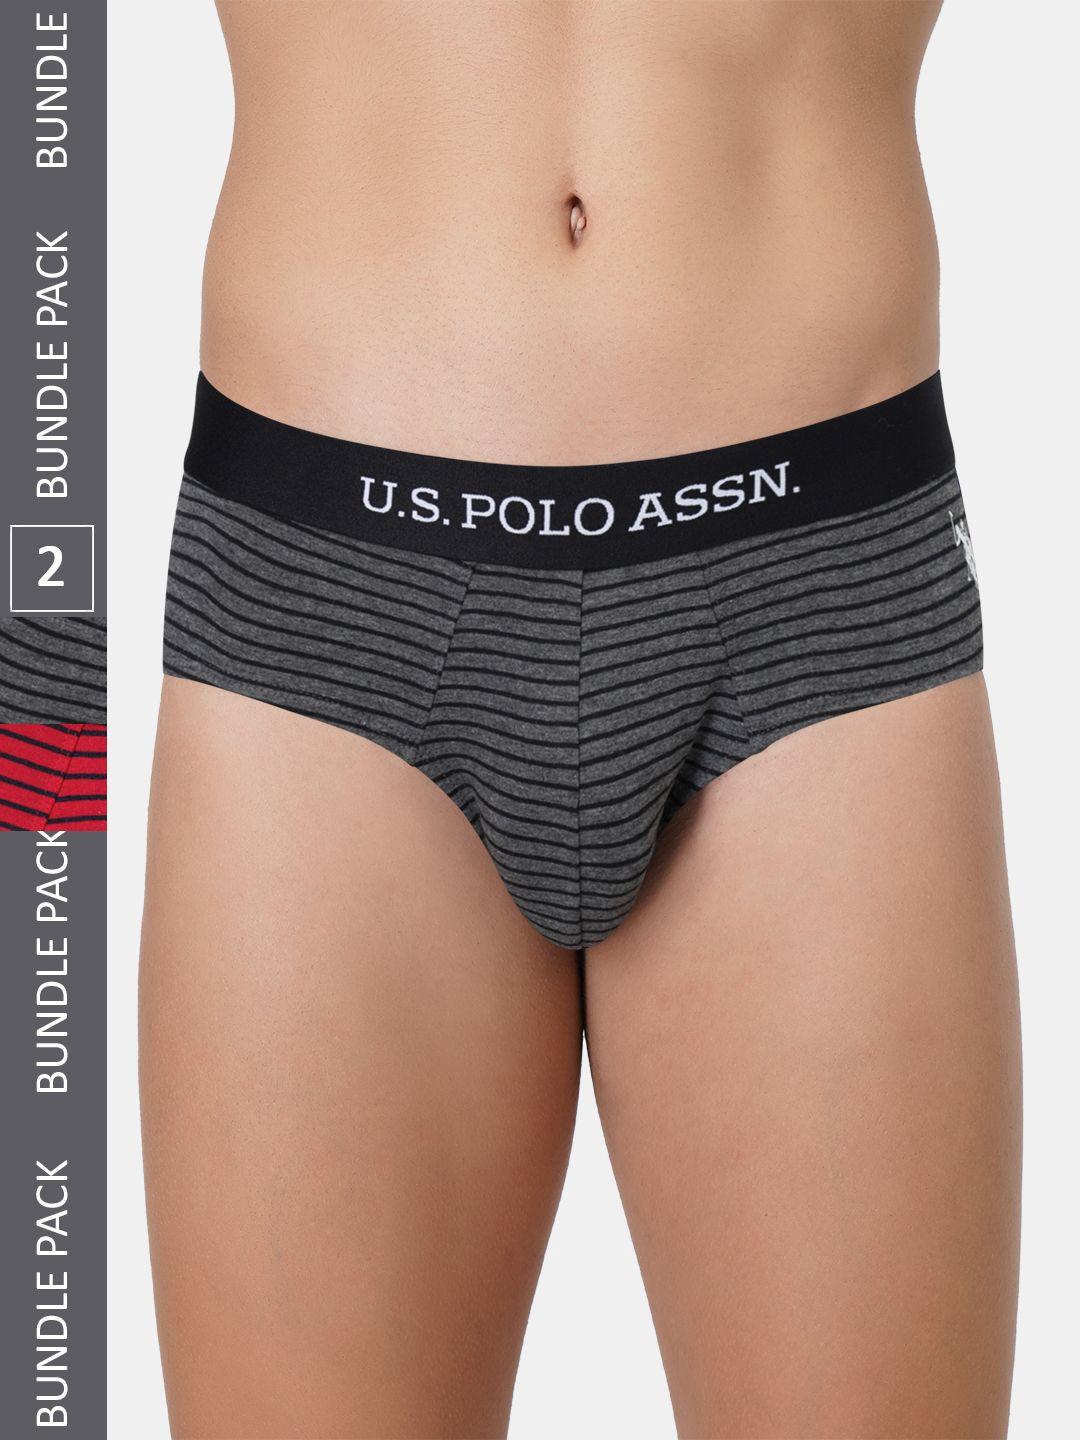 u.s.-polo-assn.-men-pack-of-2-striped-anti-bacterial-basic-briefs